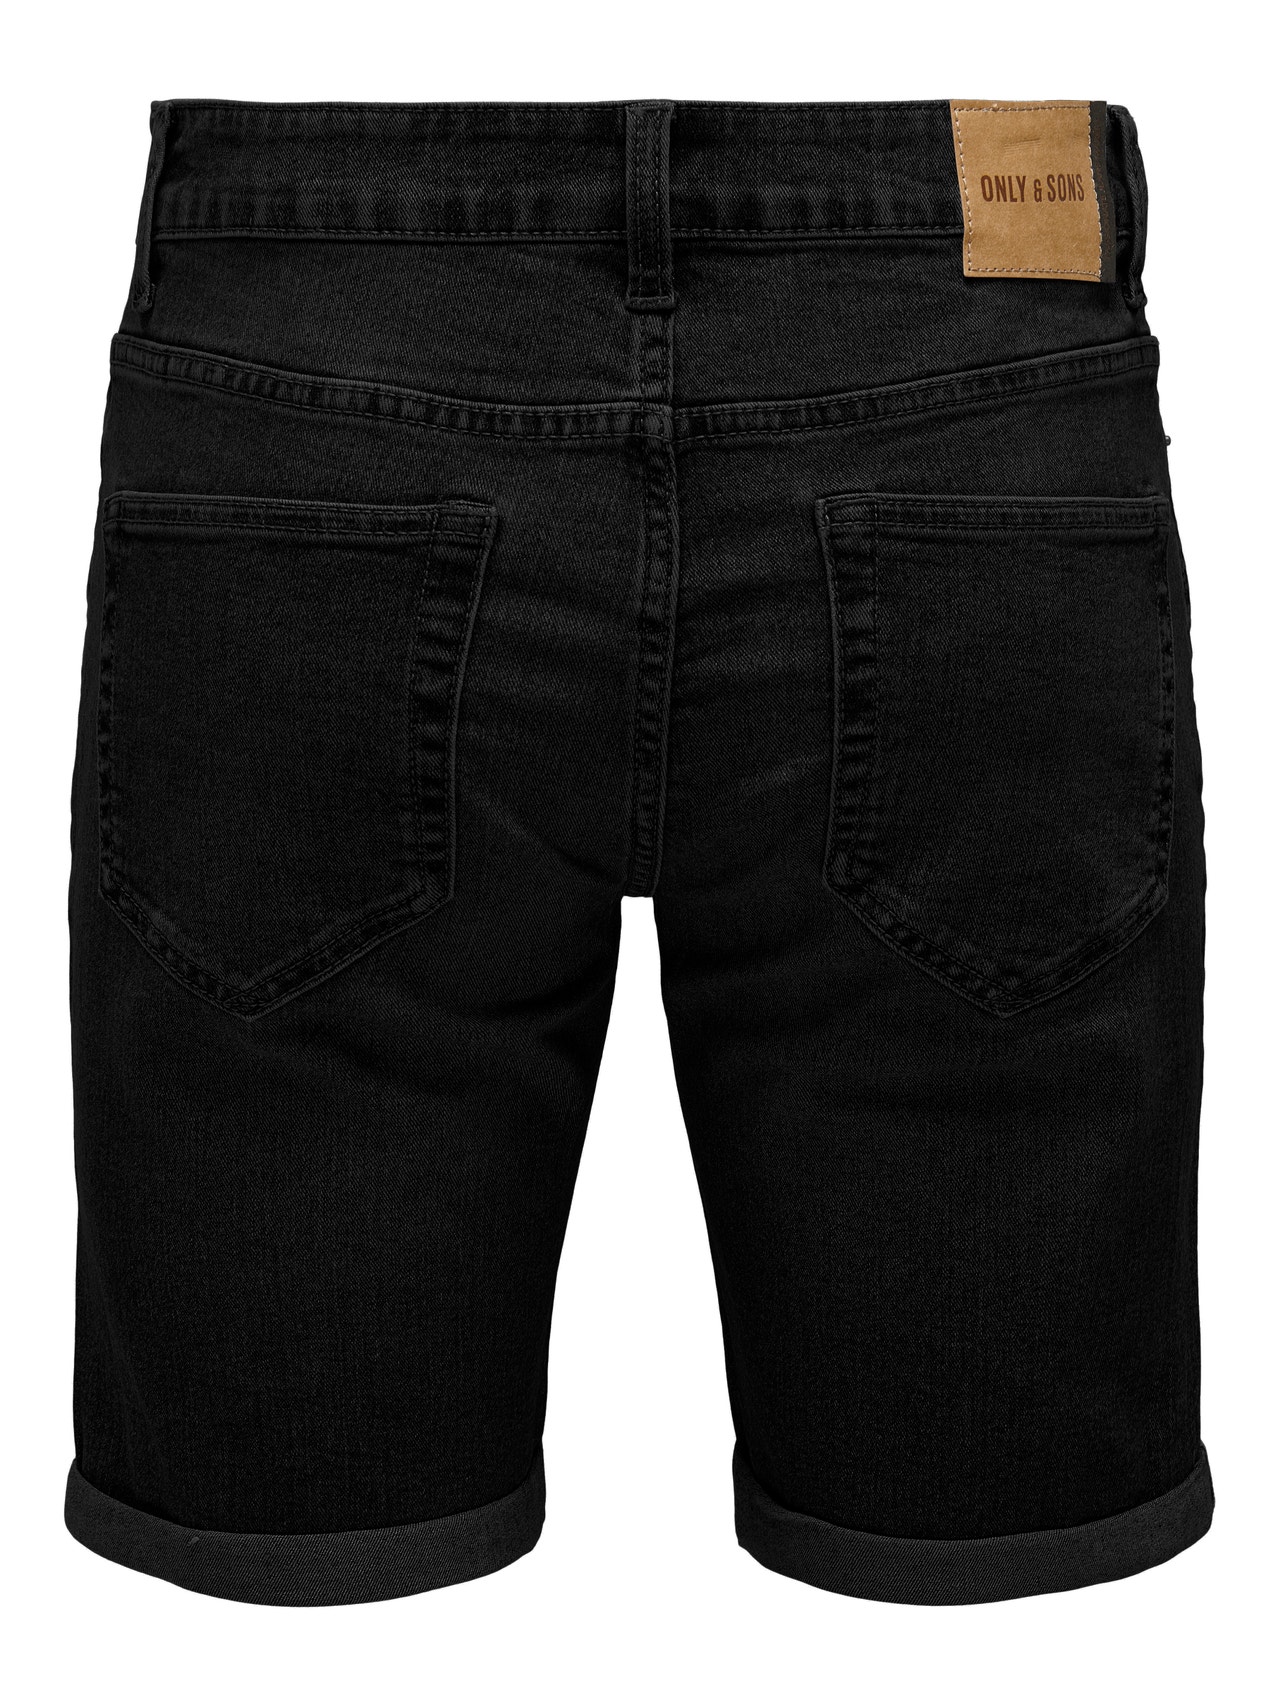 ONLY & SONS Denim Shorts With Fold Up -Black - 22026618